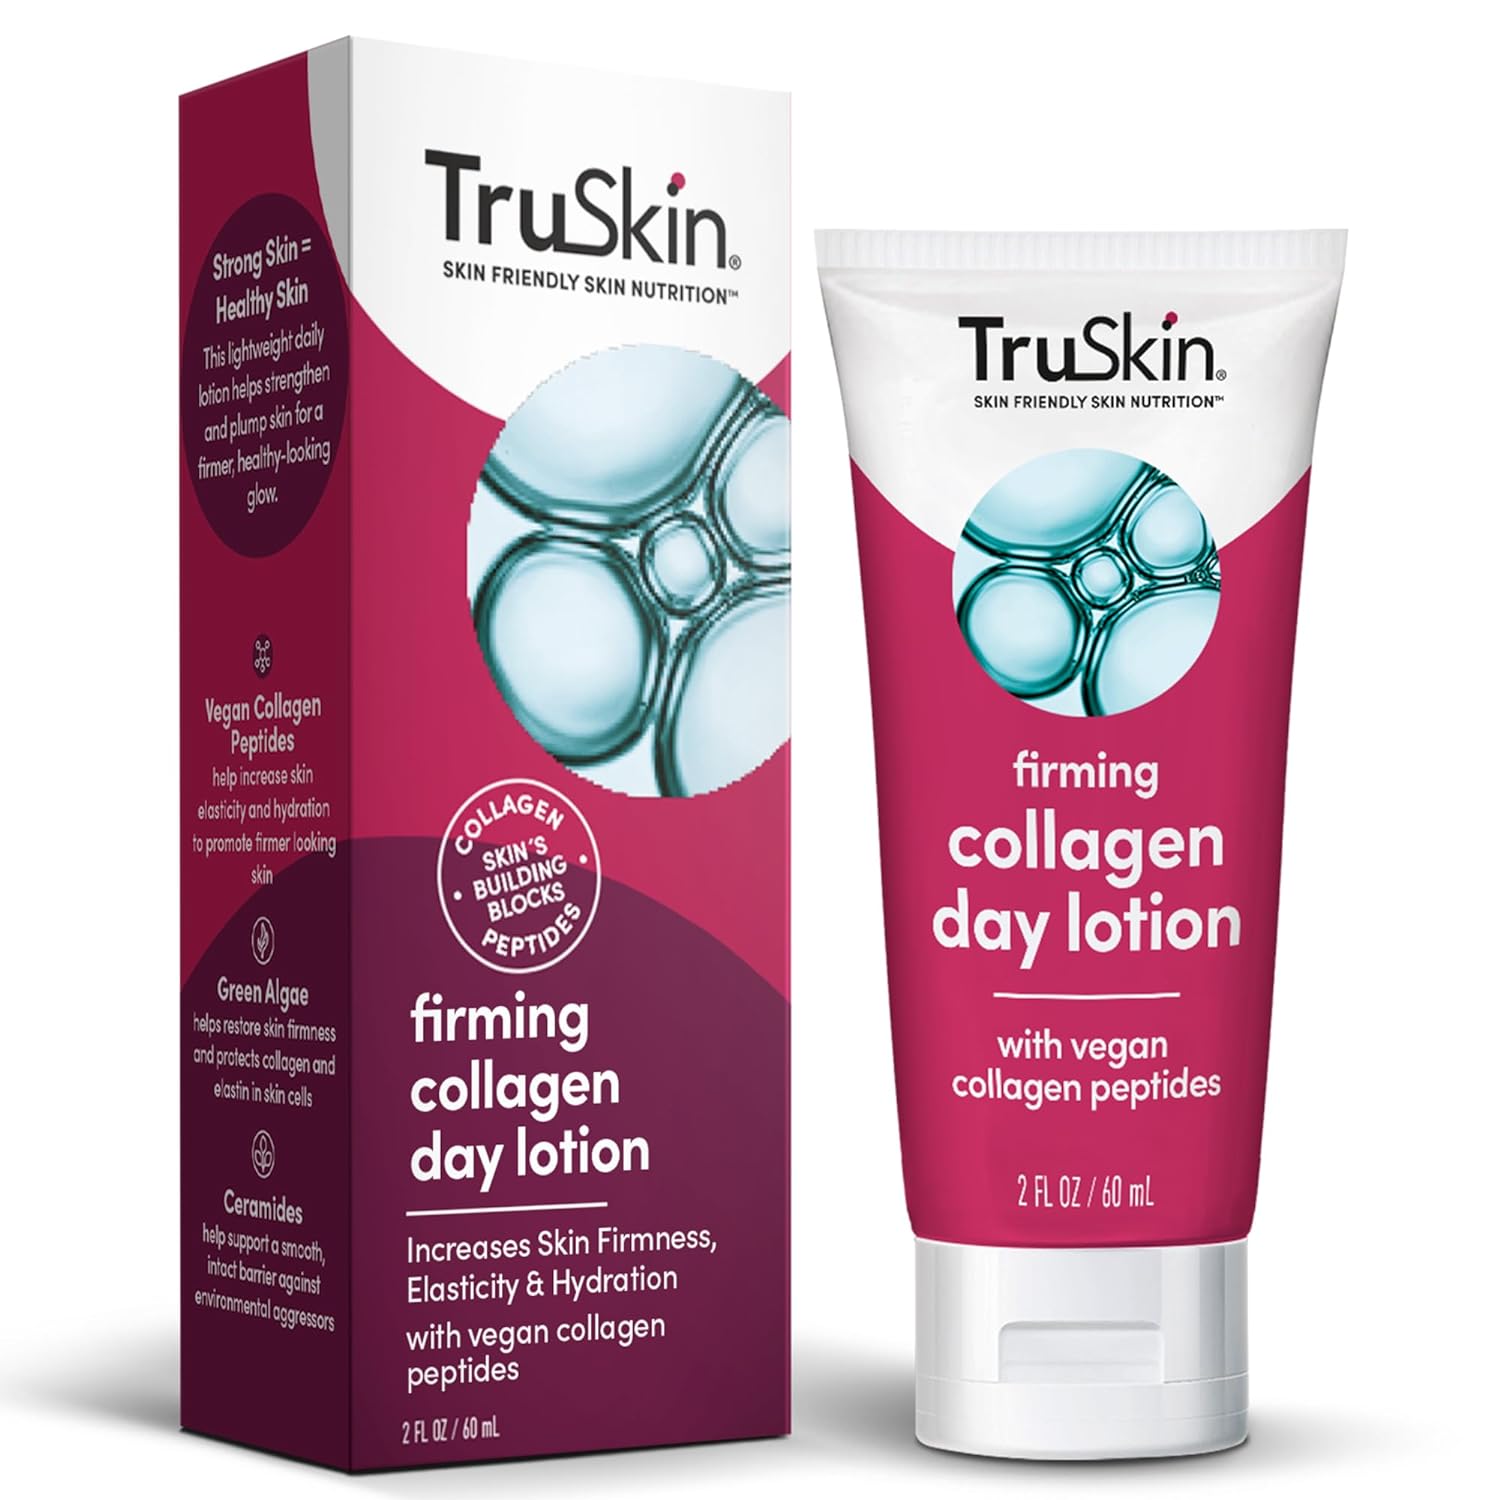 Truskin Collagen Cream For Face – Firming Day Lotion With Vegan Collagen Peptides, Tri-Ceramides  Green Algae – Anti Aging Skin Care Made To Strengthen  Plump Skin For A Firm, Healthy Glow - 2 Fl Oz